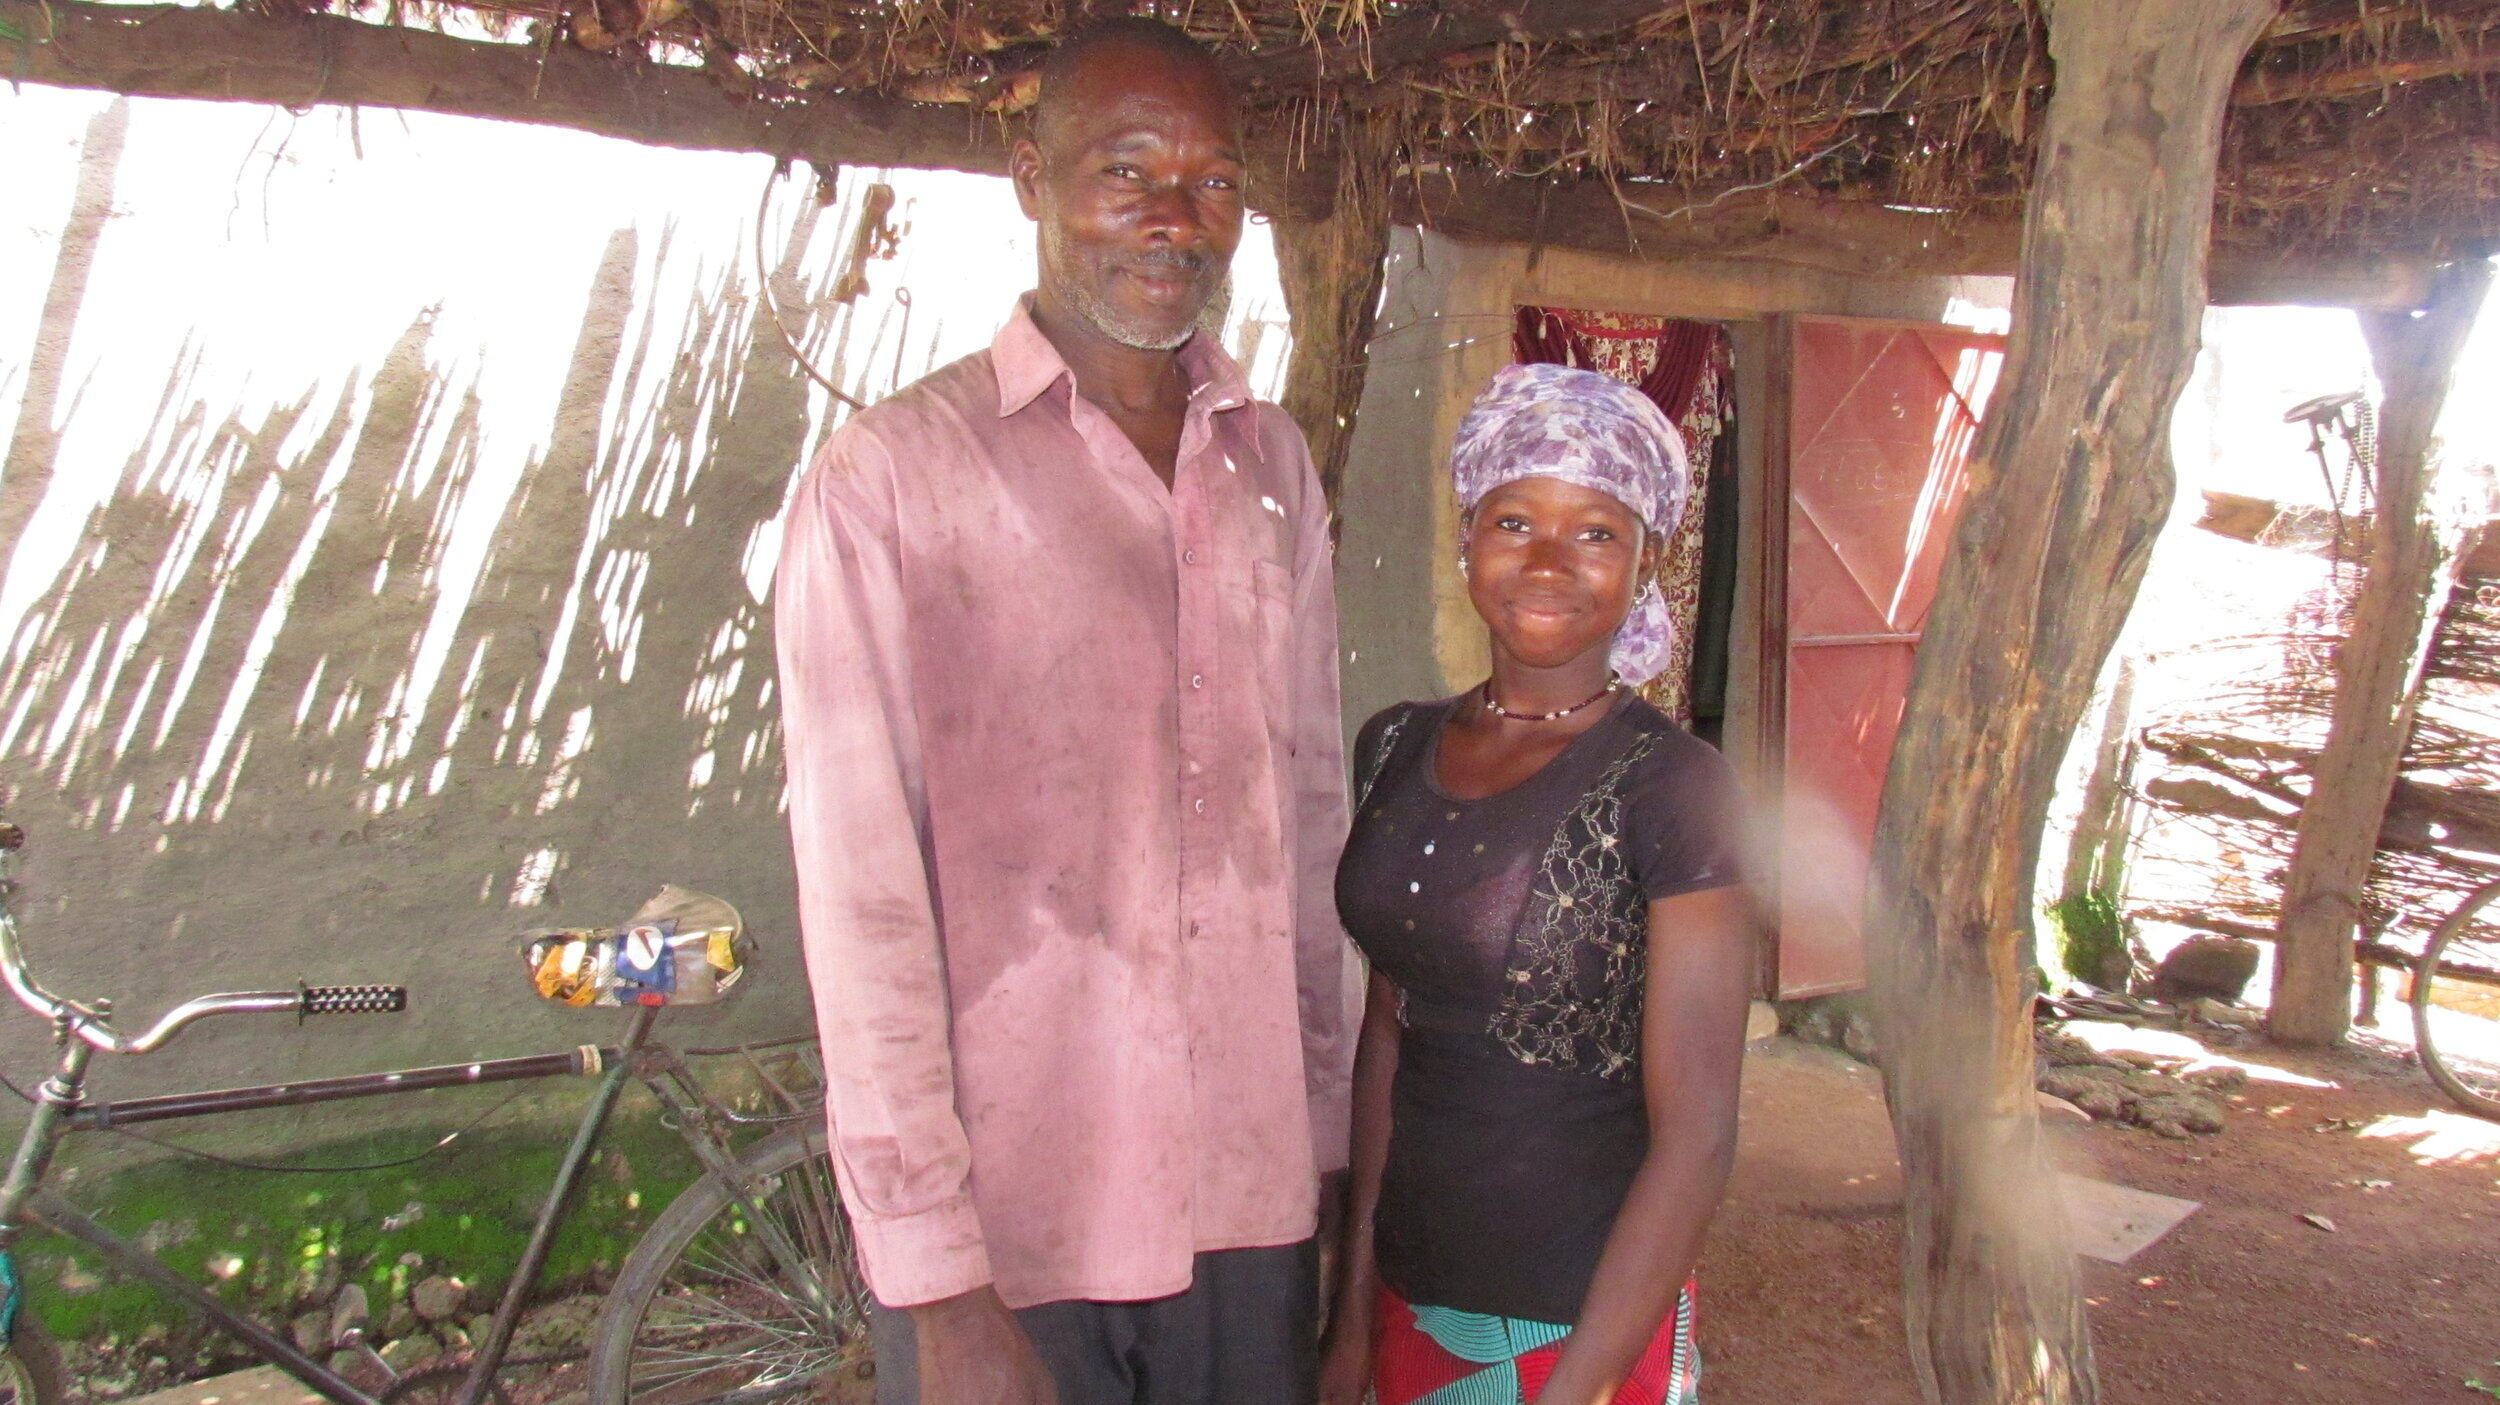 Bintou and her father at our meeting.